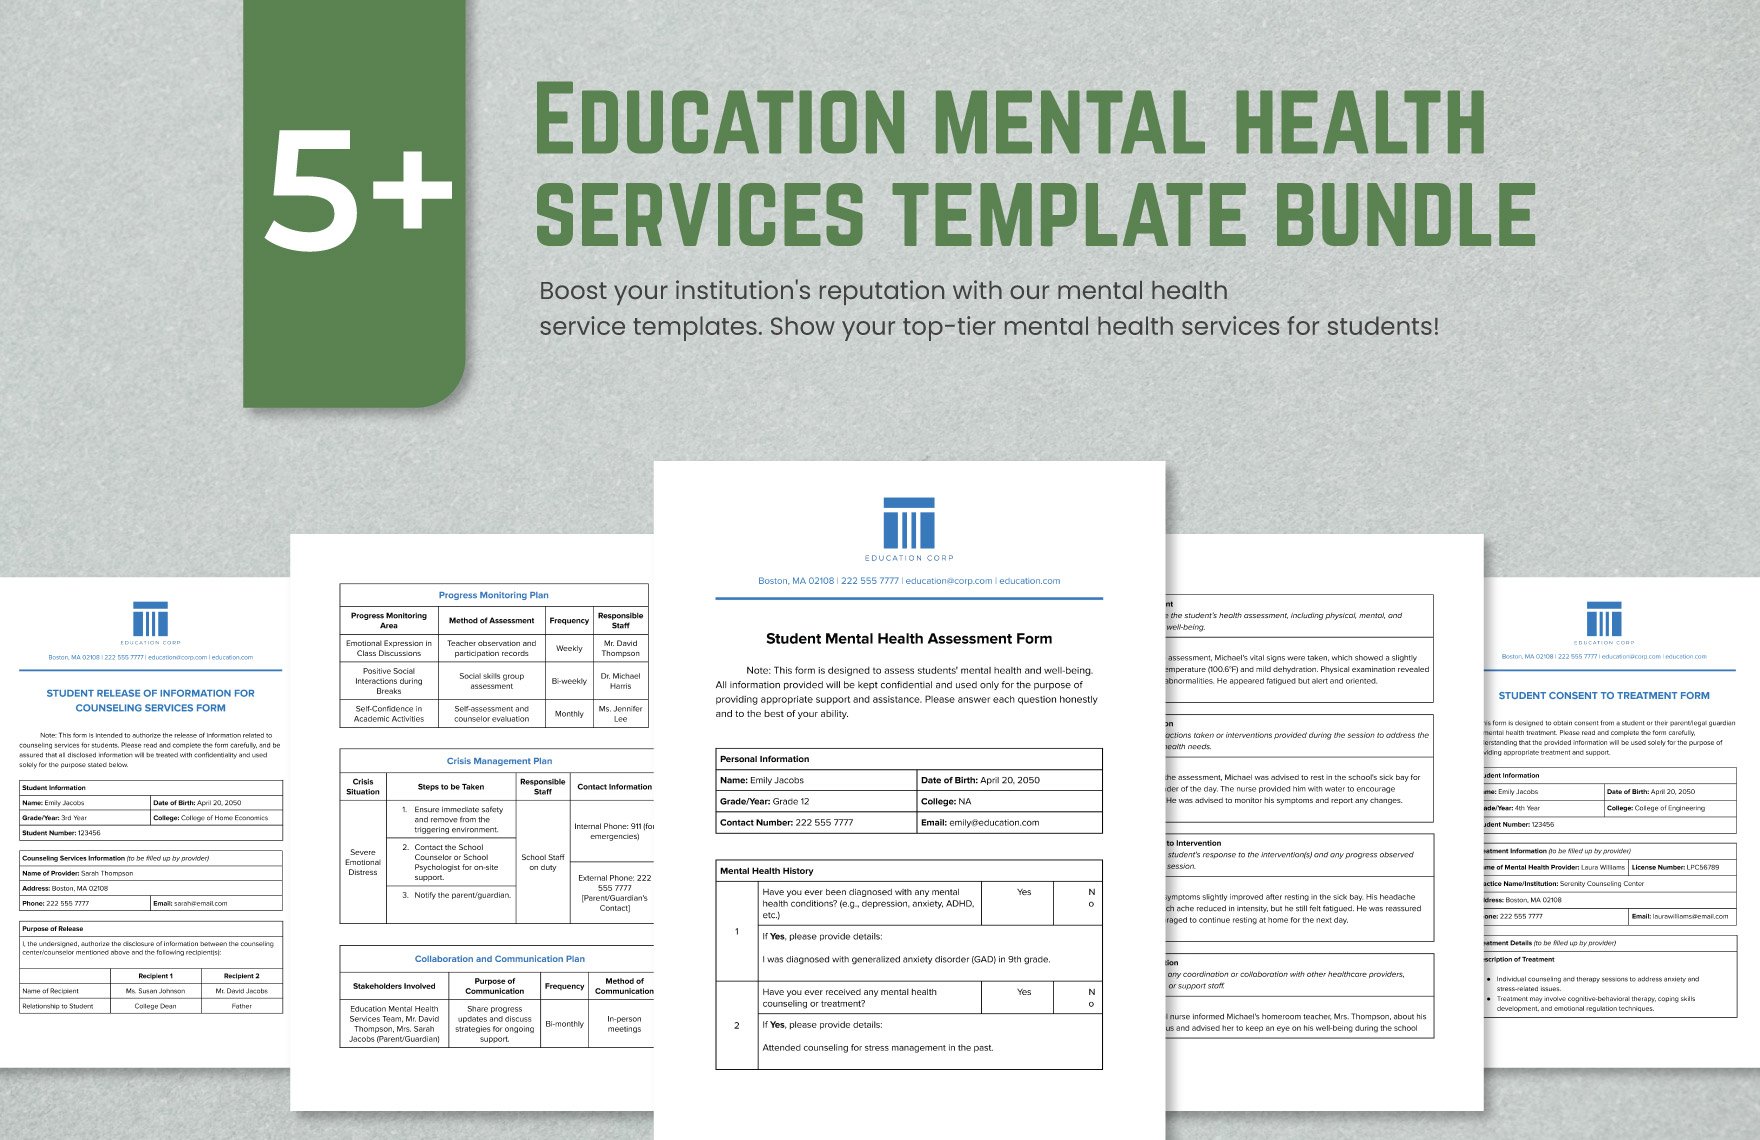 5+ Education Mental Health Services Template Bundle in Word, Google Docs, PDF